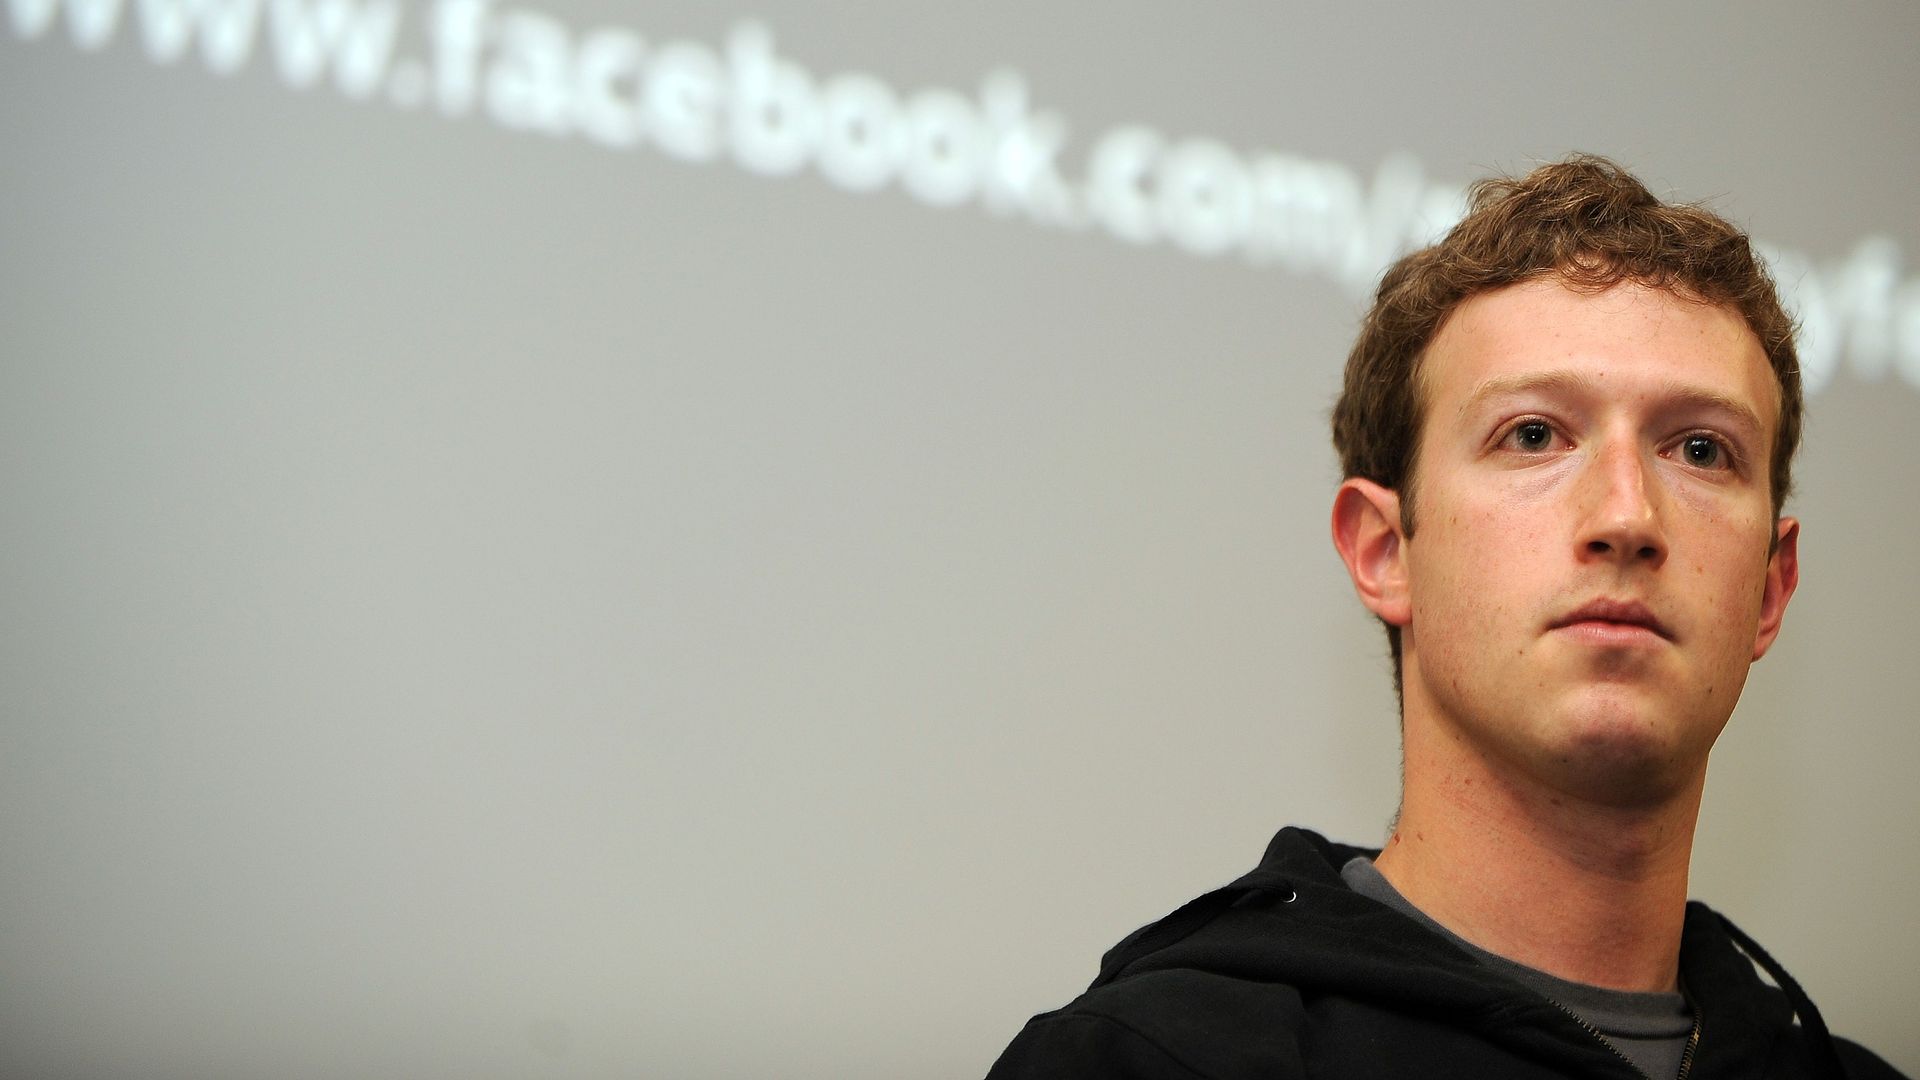 Mark Zuckerberg speaks during a press conference at the Facebook headquarters in Palo Alto, California 